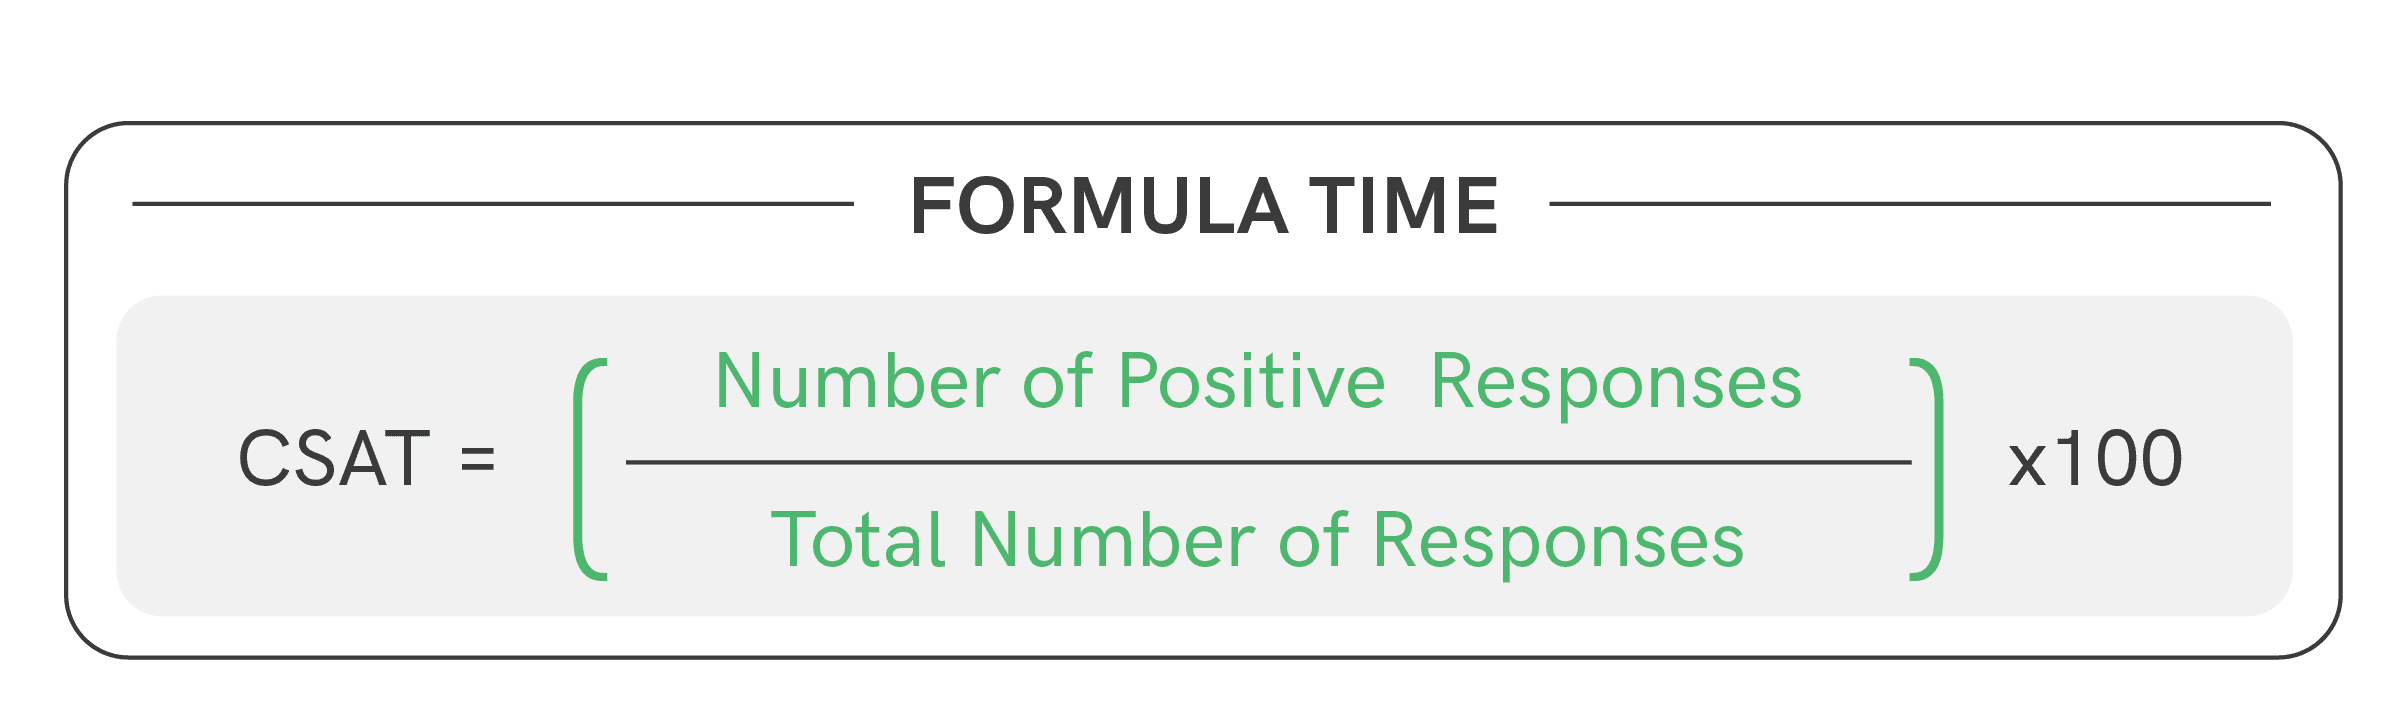 Infographic showing formula for customer satiafaction score